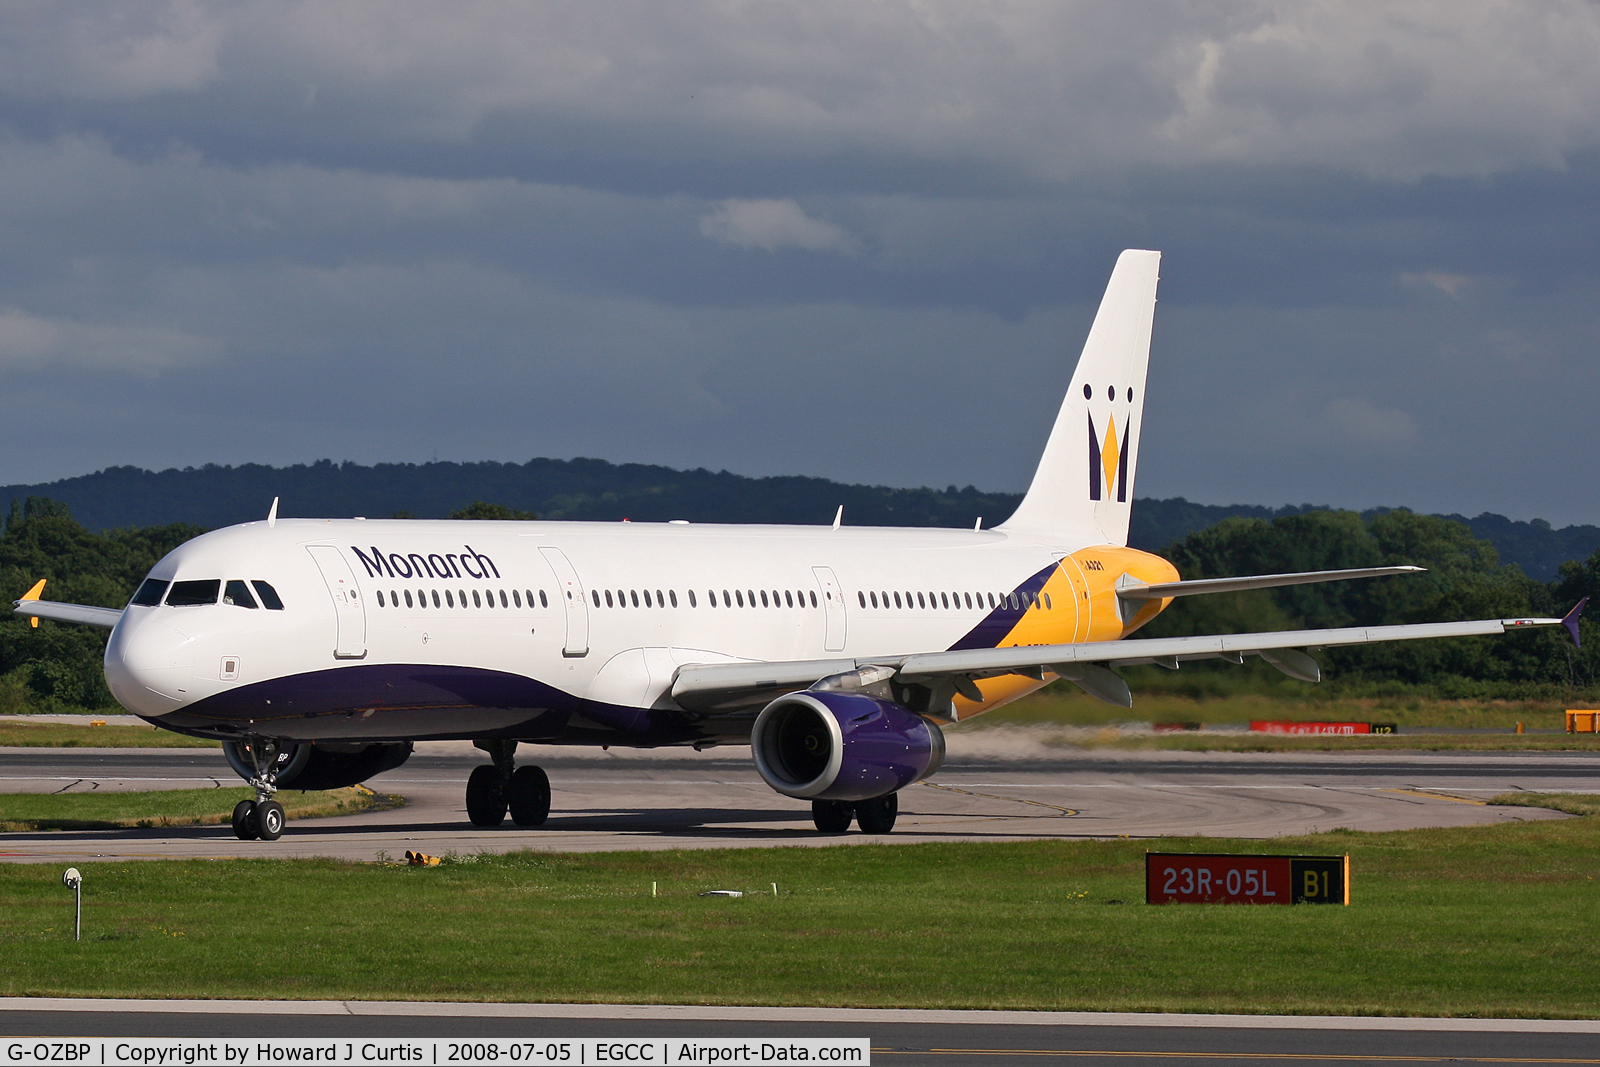 G-OZBP, 2001 Airbus A321-231 C/N 1433, Monarch Airlines.